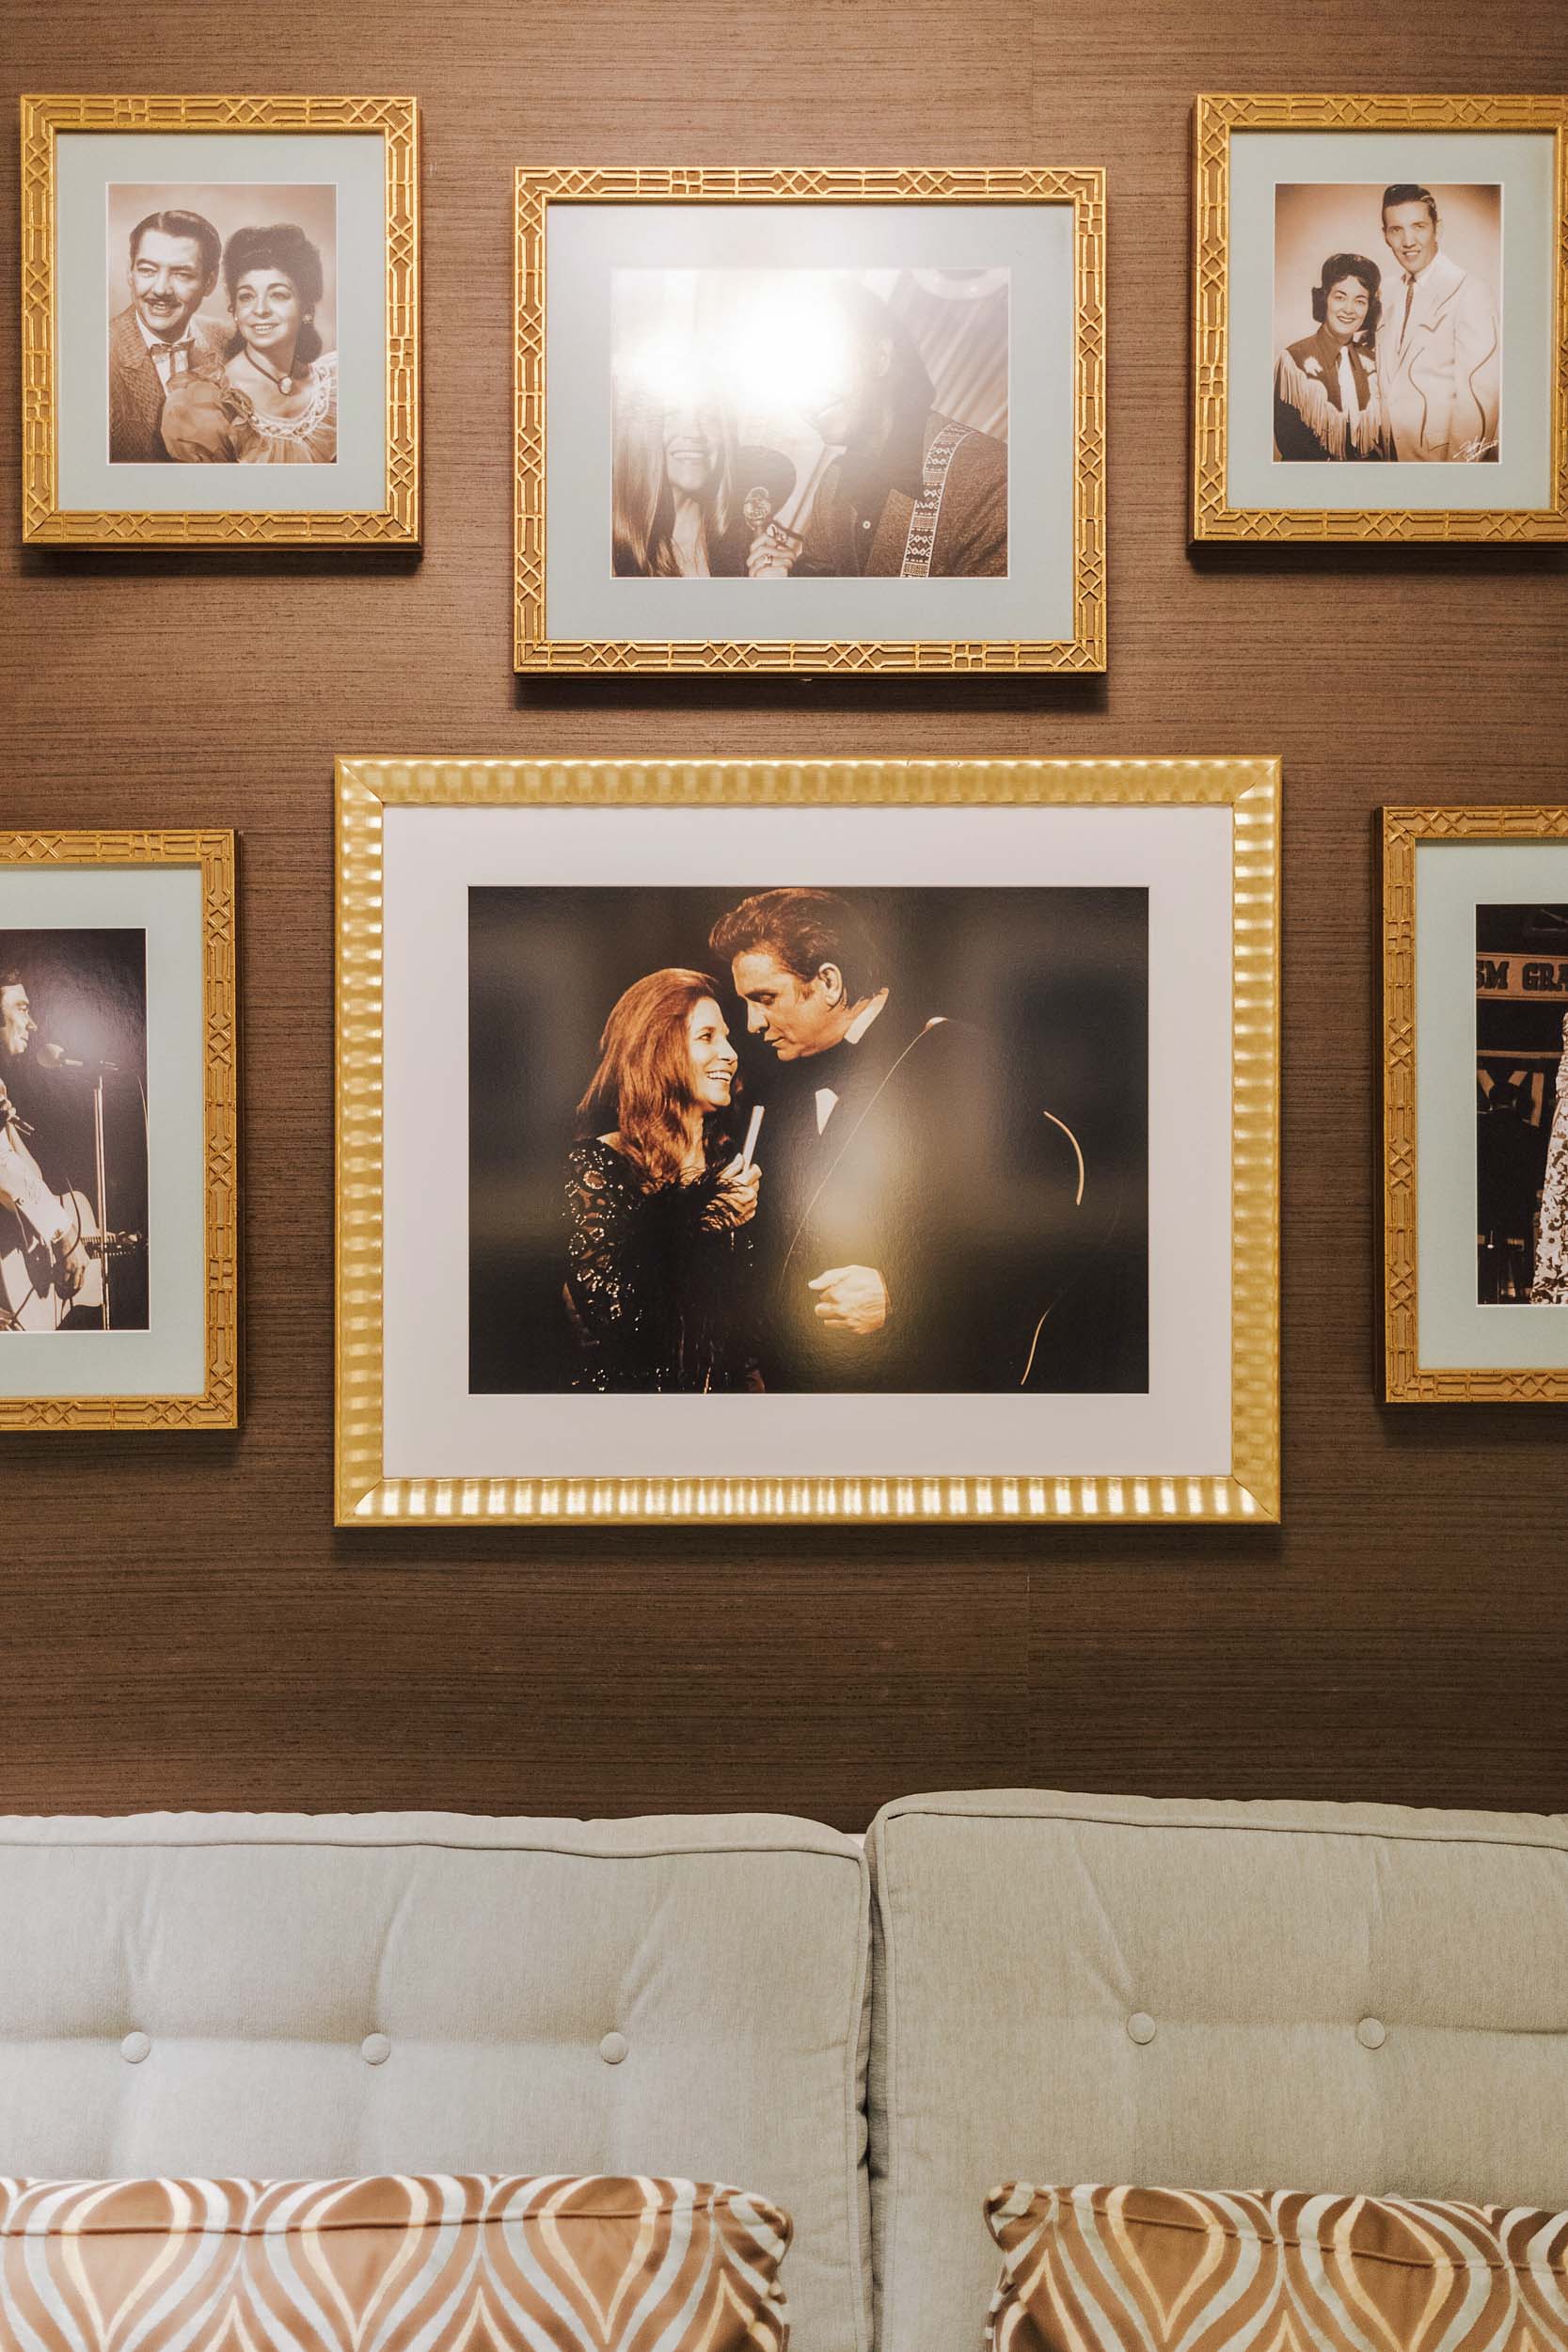 Photos of iconic country music couples backstage at the Opry